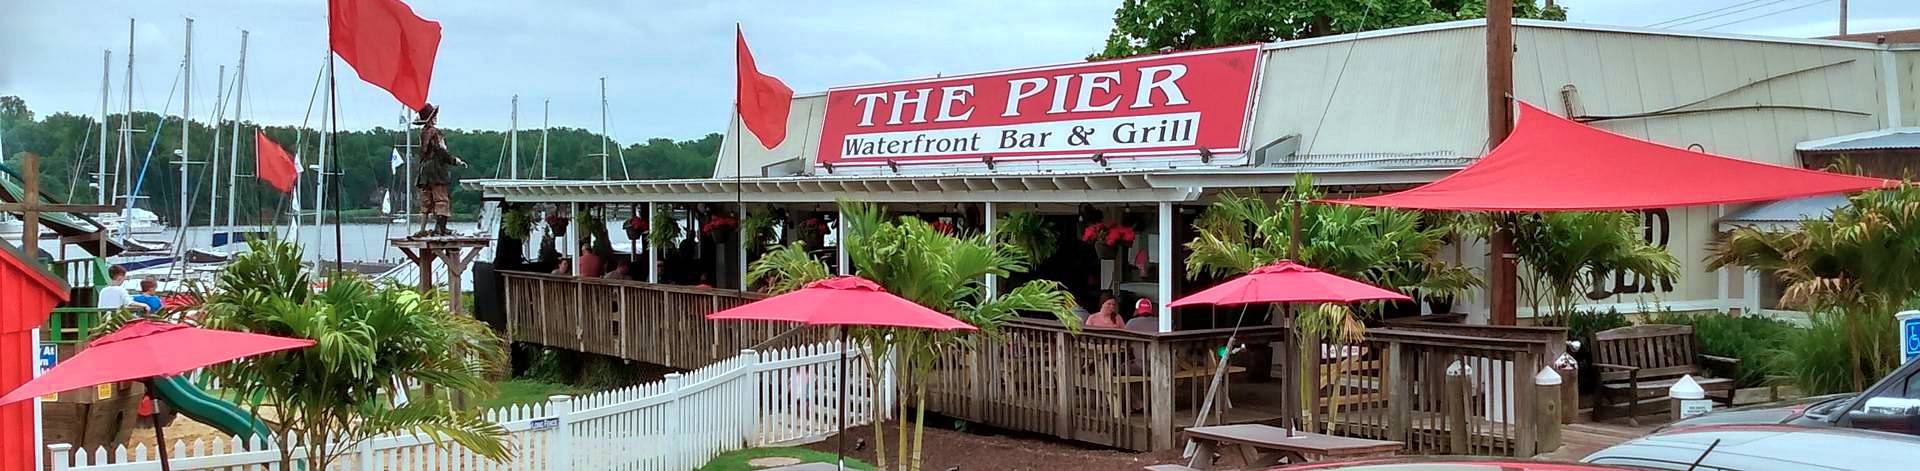 The Pier Waterfront Bar and Grill